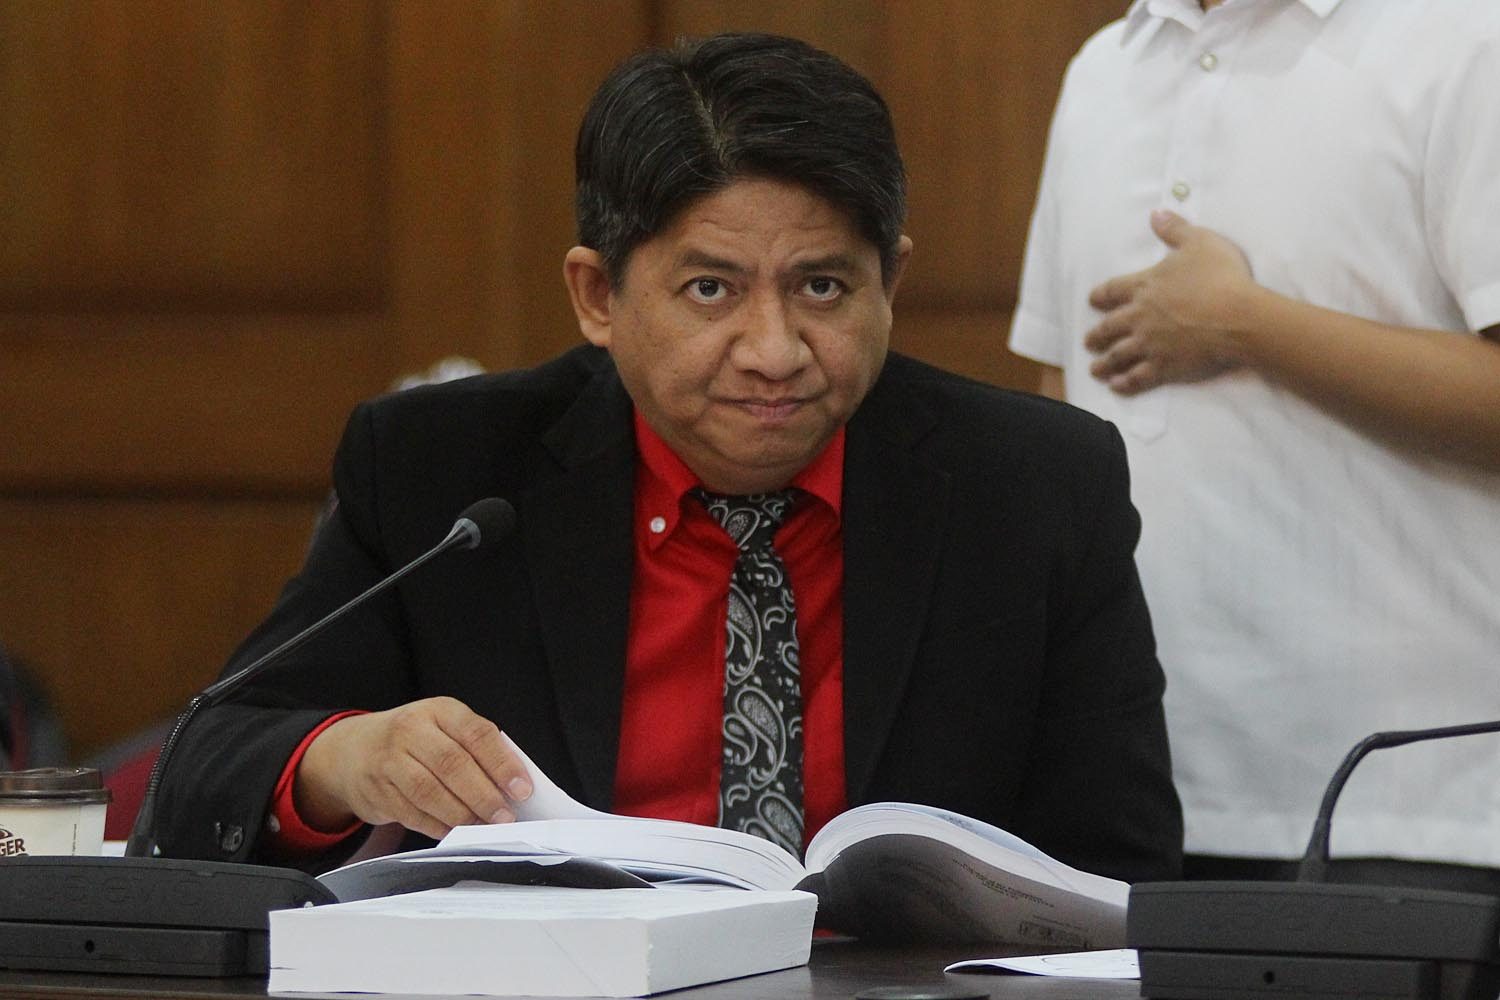 DOH slams Gadon over face mask claim: ‘This is not a joking matter’